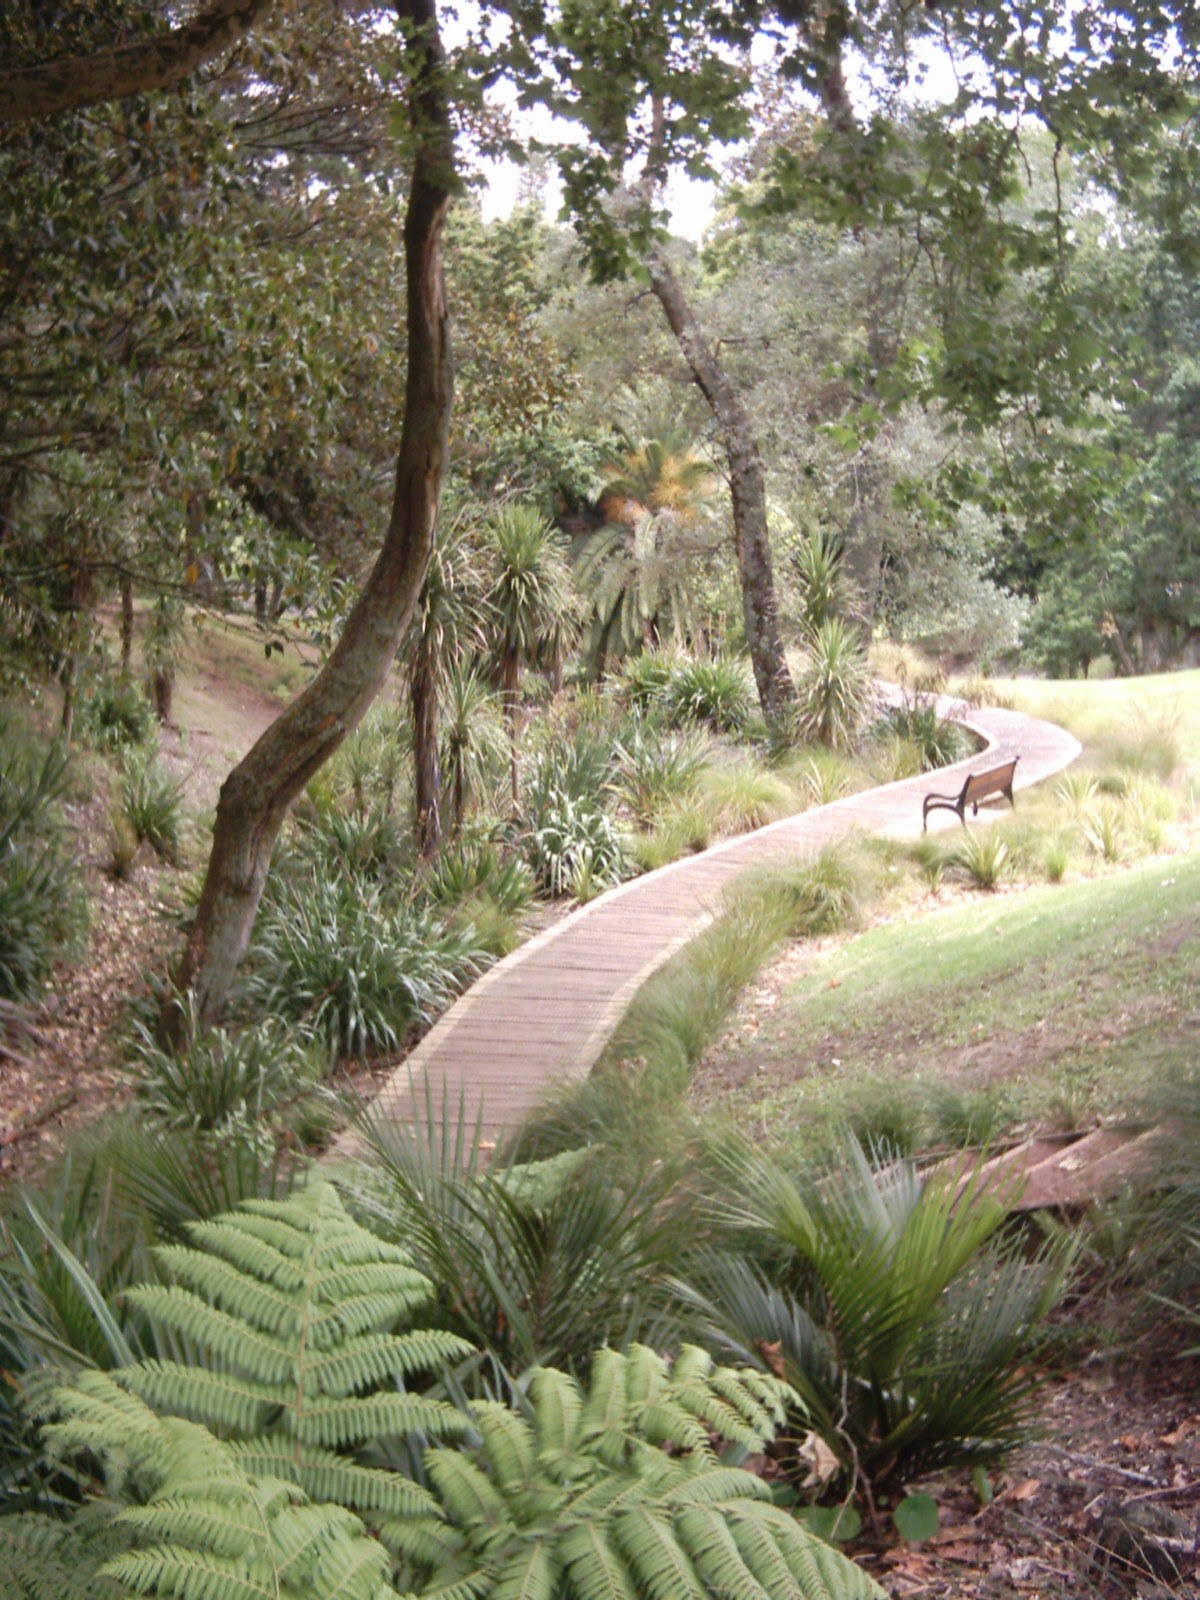 http://upload.wikimedia.org/wikipedia/commons/4/49/Western_Park_Auckland.jpg